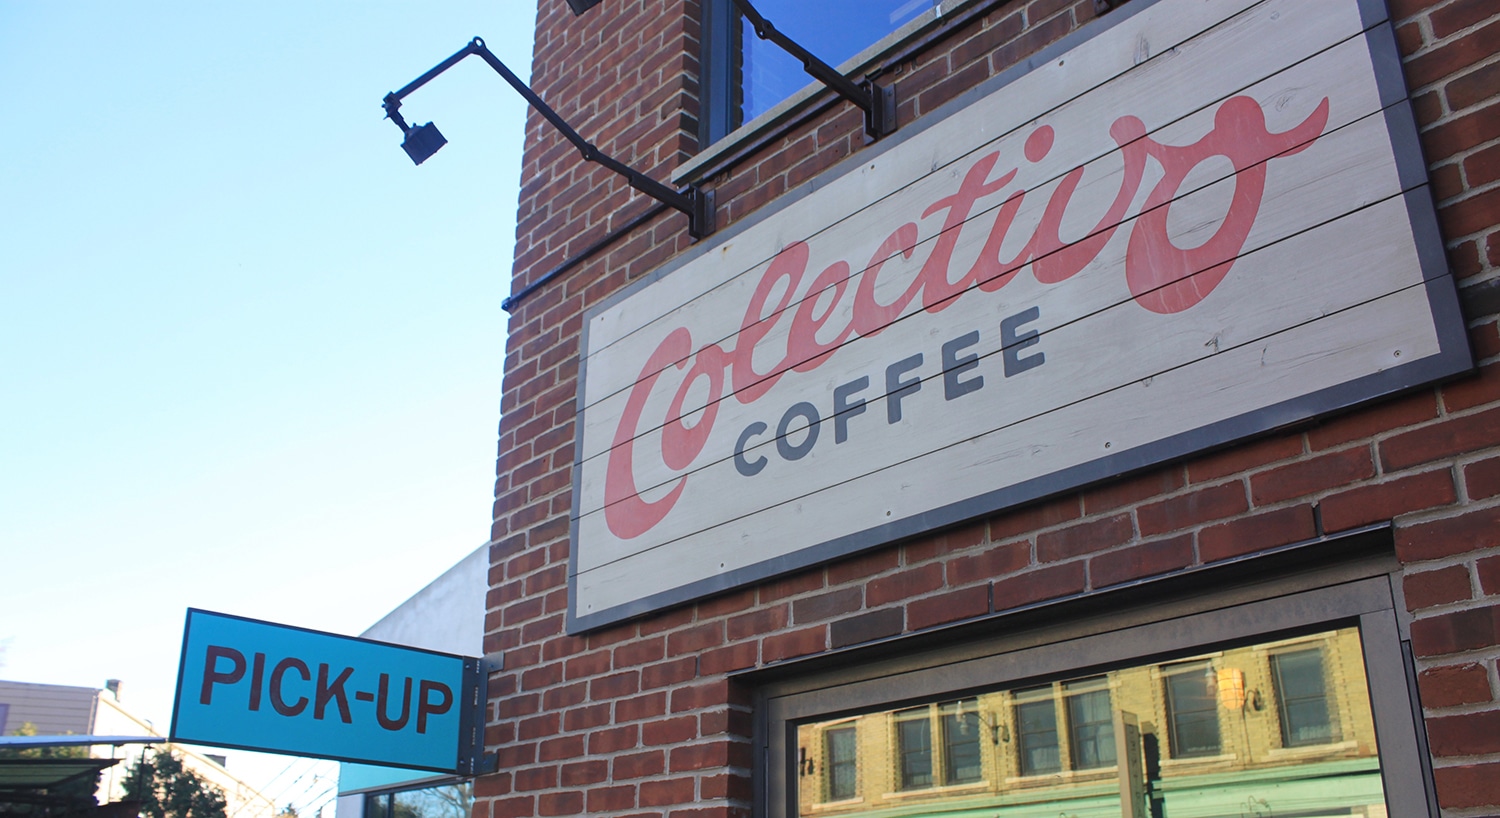 Colectivo Coffee sign painted on brick building, with Pick Up sign.